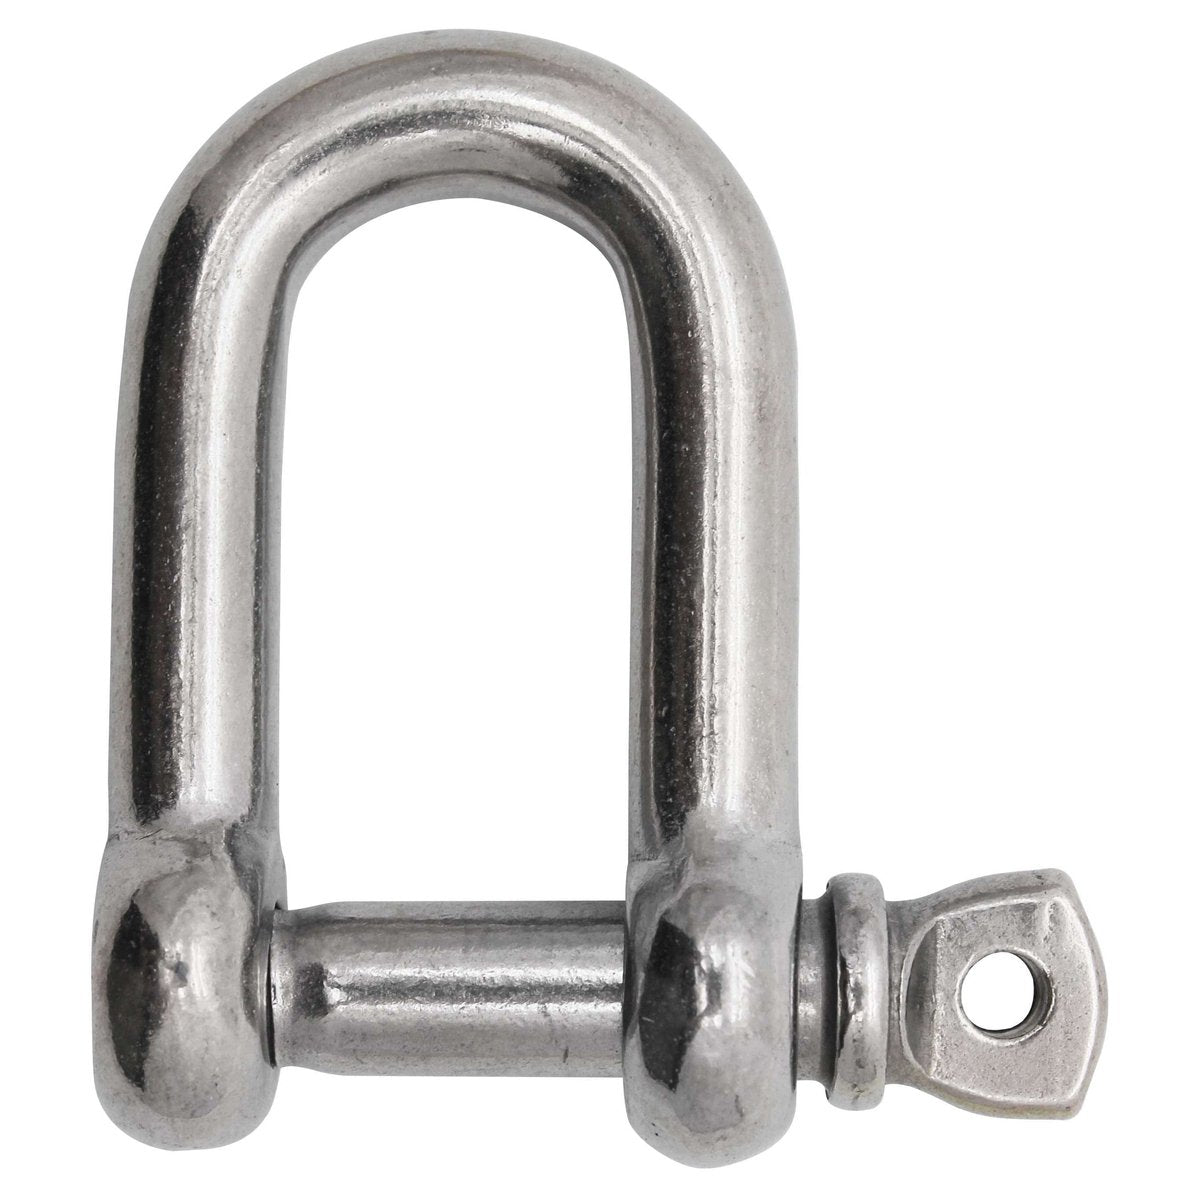 Extreme Max BoatTector SS D Shackle 3/8" #3006.8243